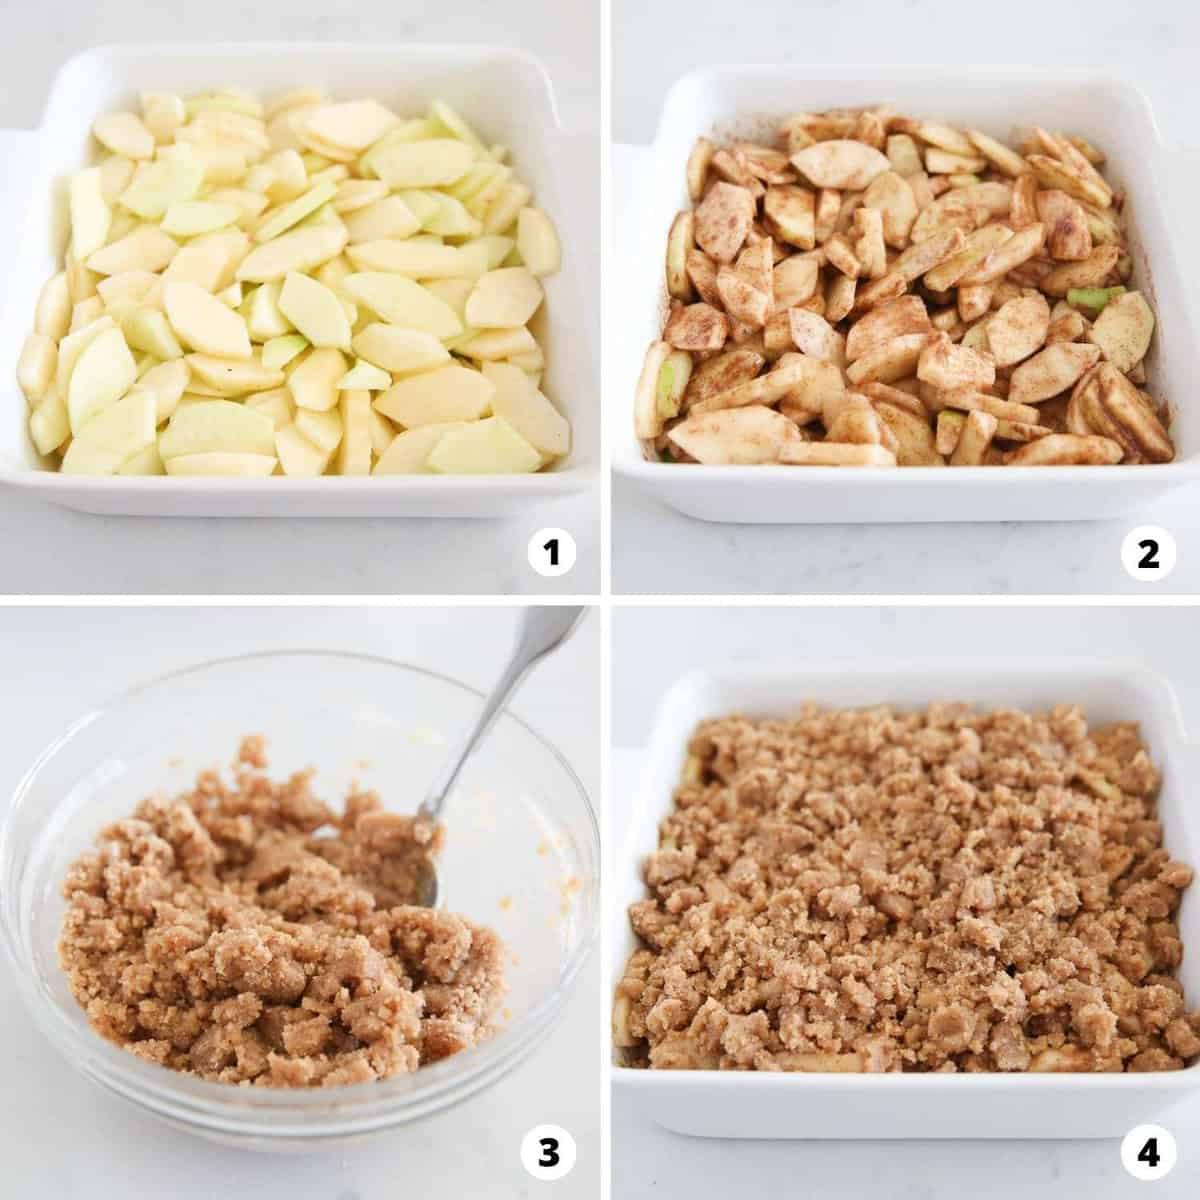 Showing the process of making apple crumble in a 4 step collage.